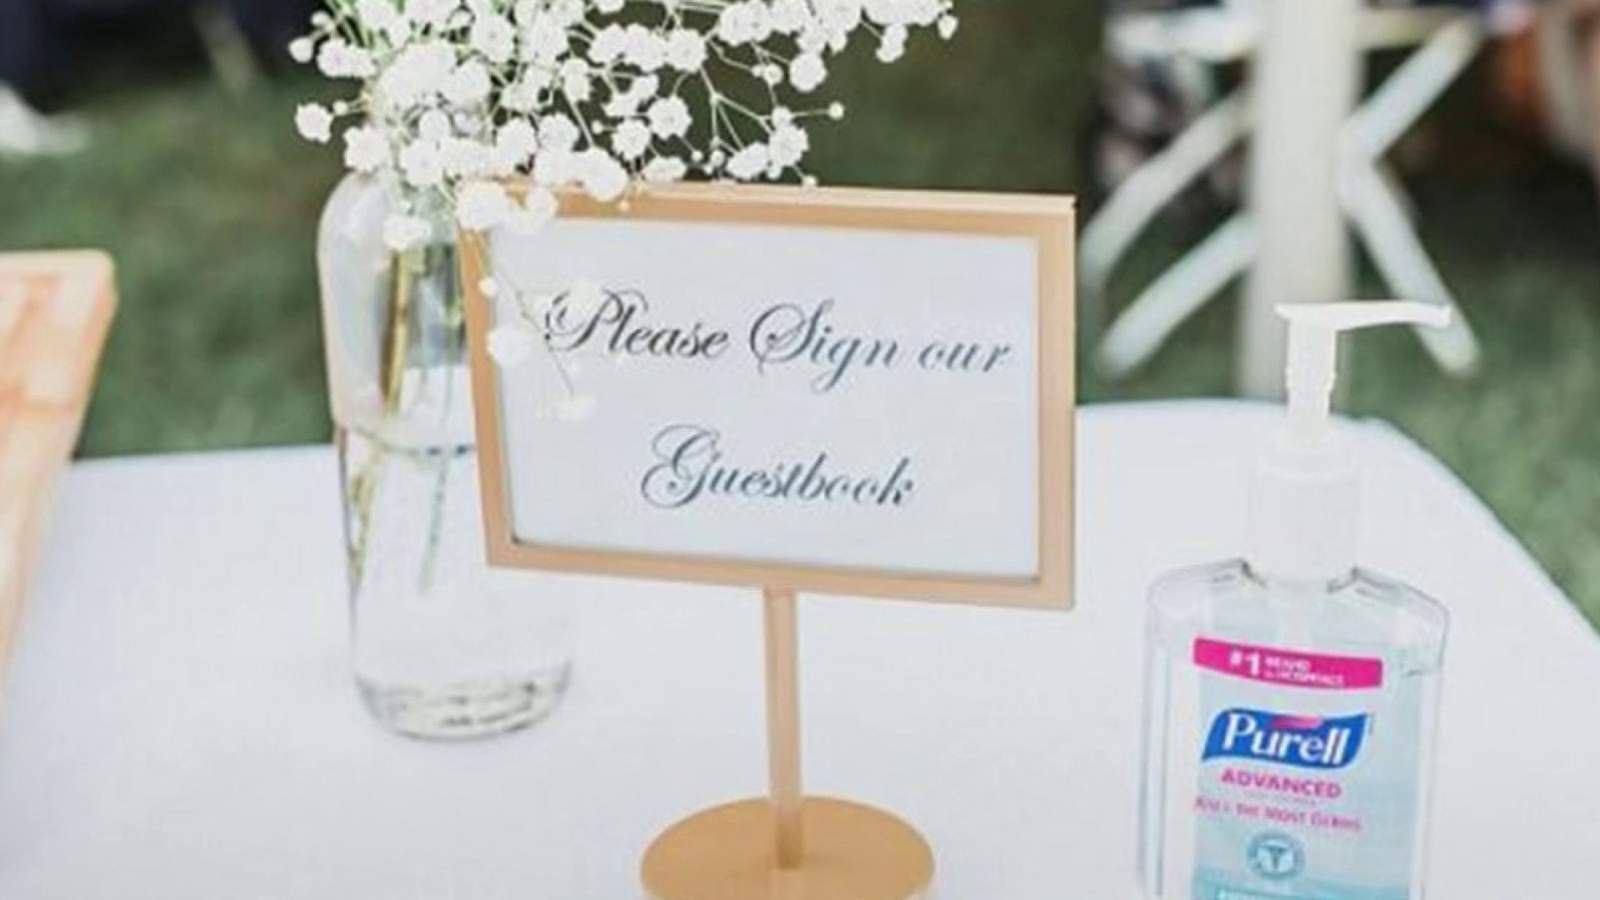 Sanitization stations every wedding should have